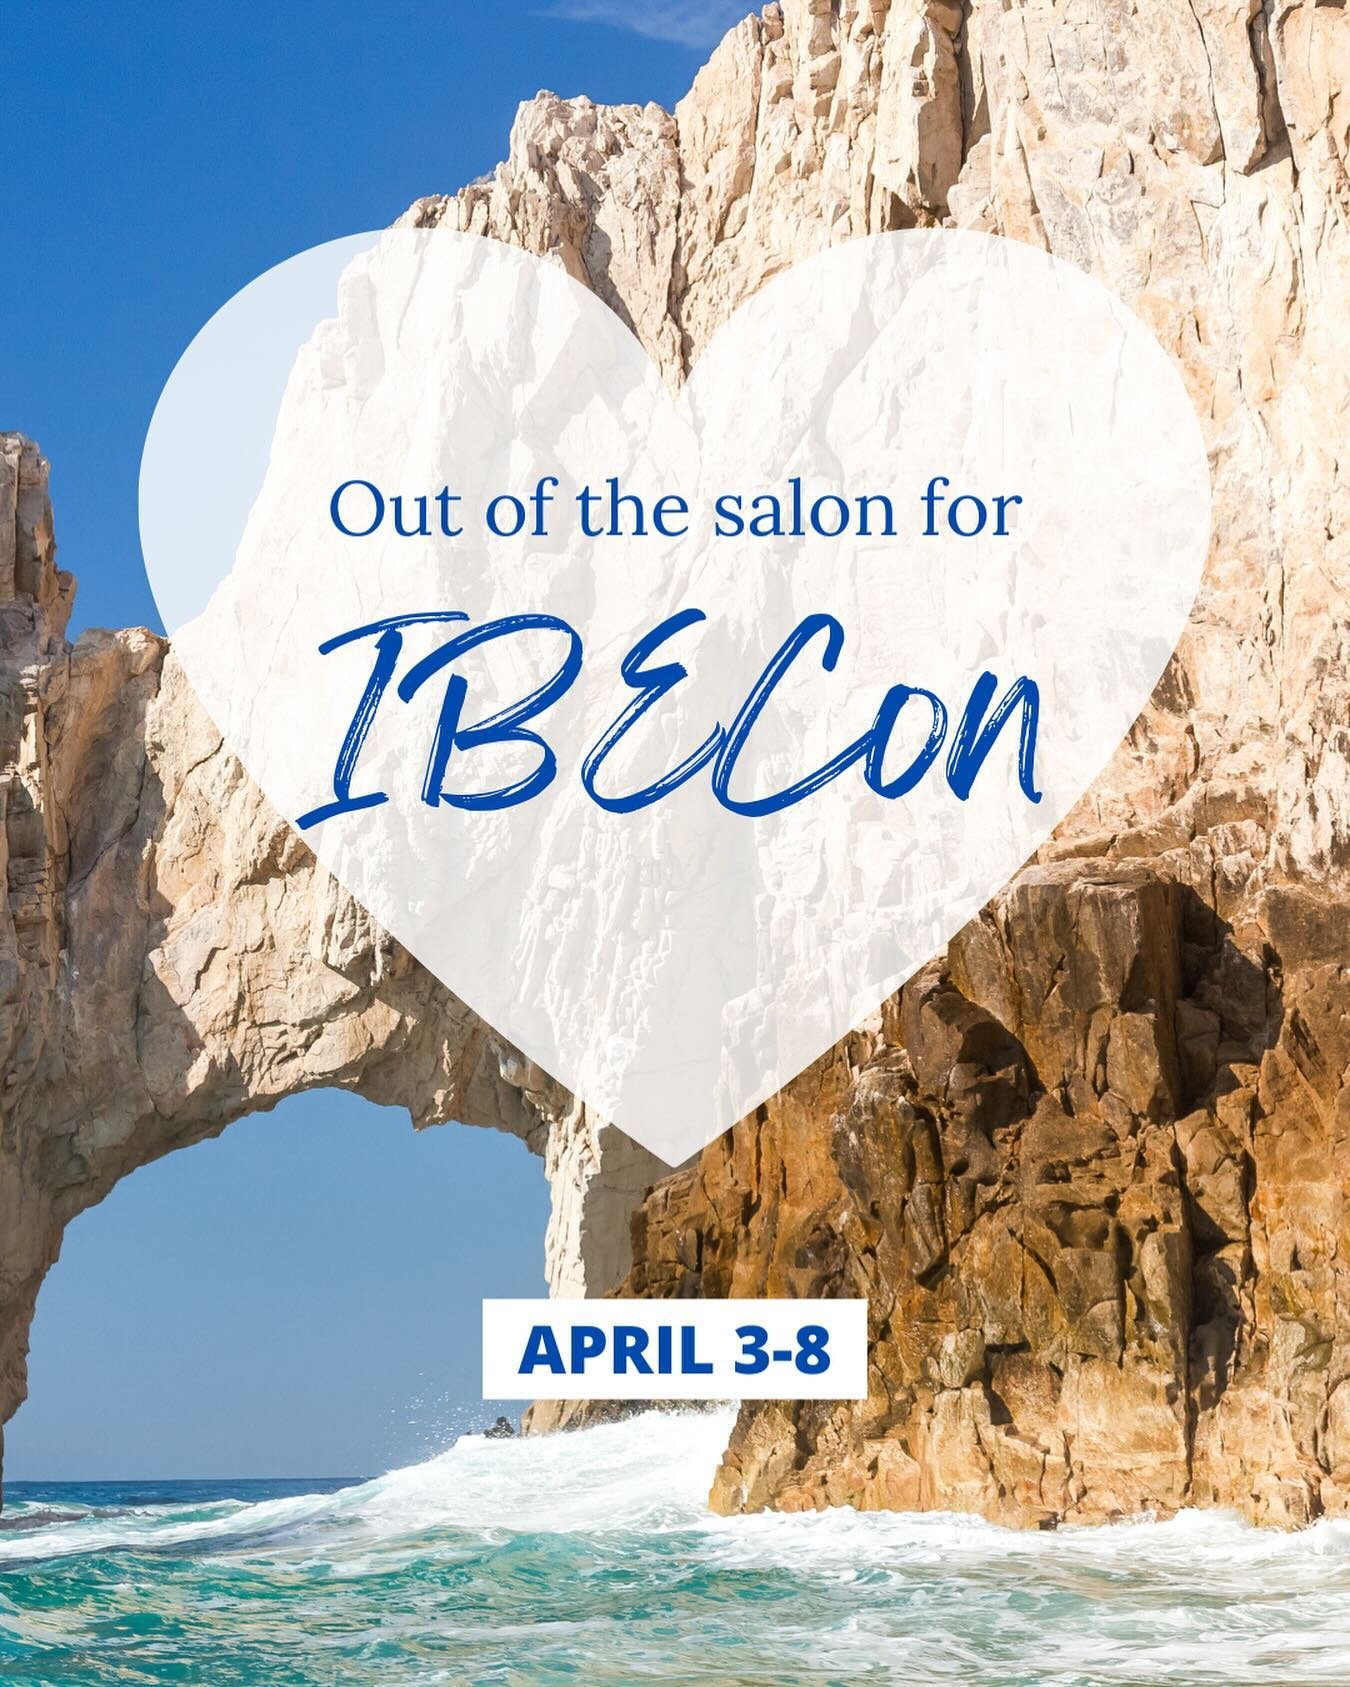 It is time for IBECon in Cabo! 🇲🇽
I will be out of the salon 4/3-4/8 

Peep my stories this week because I&rsquo;m bringing you with me. 🤗 
My message response time will probably be a little slower with all the activities going on!